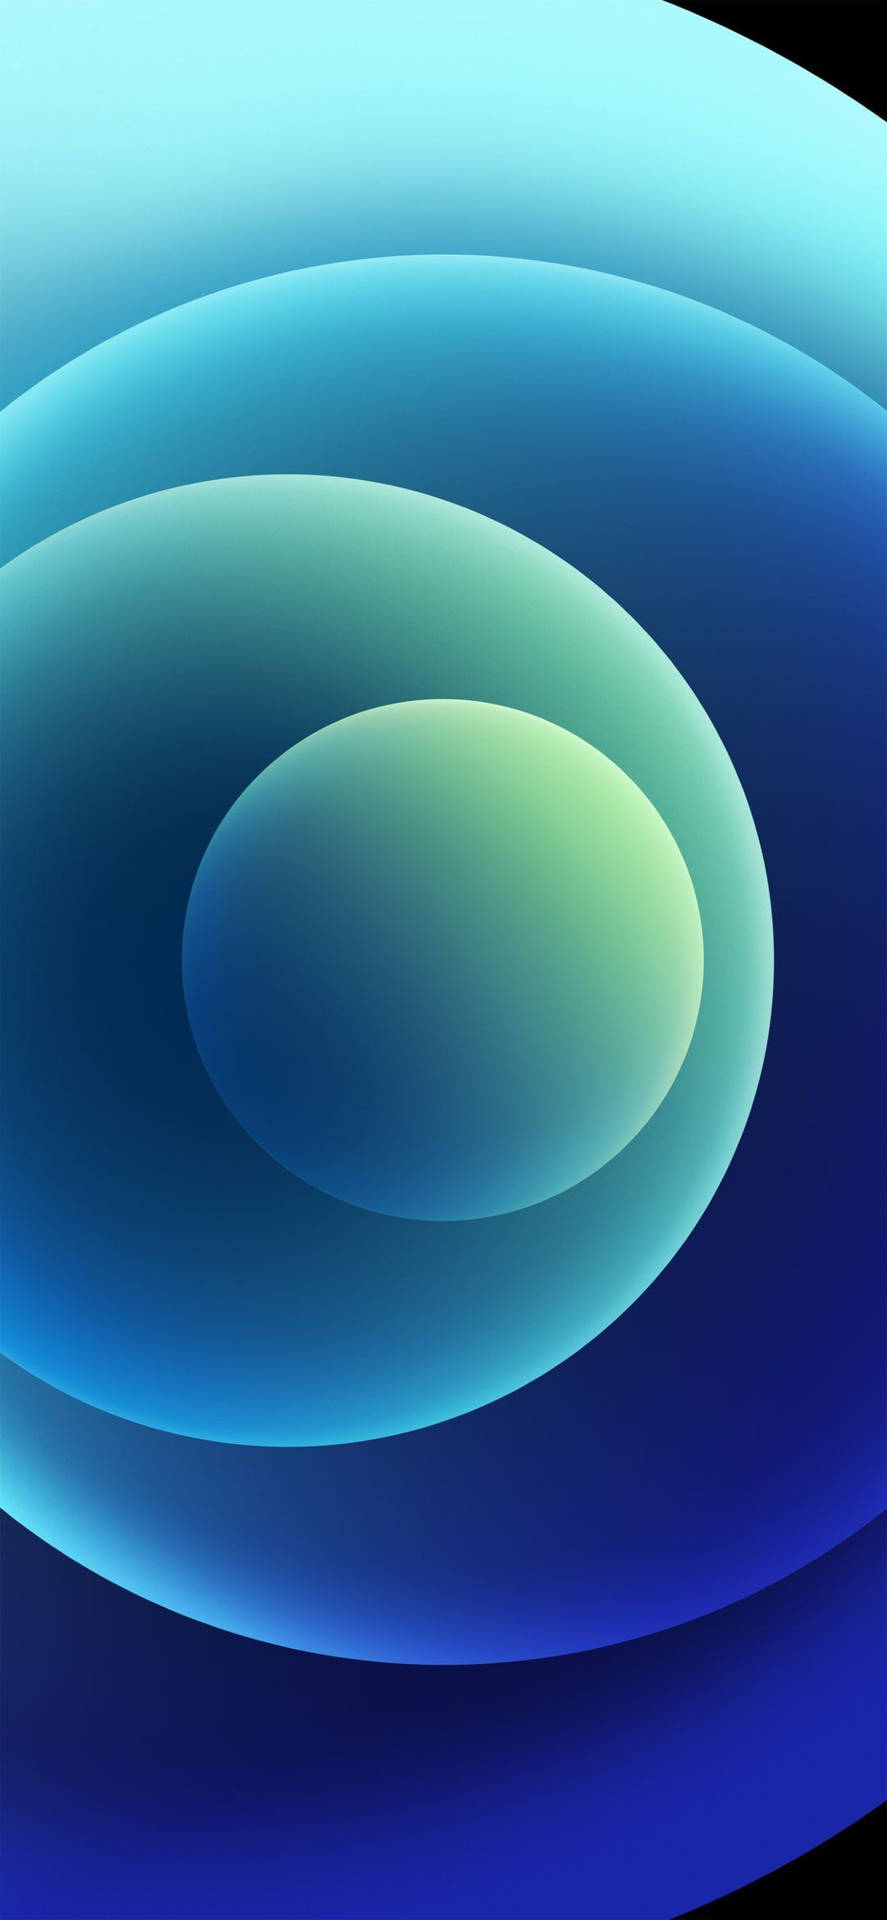 Abstract Spheres Iphone Live Background